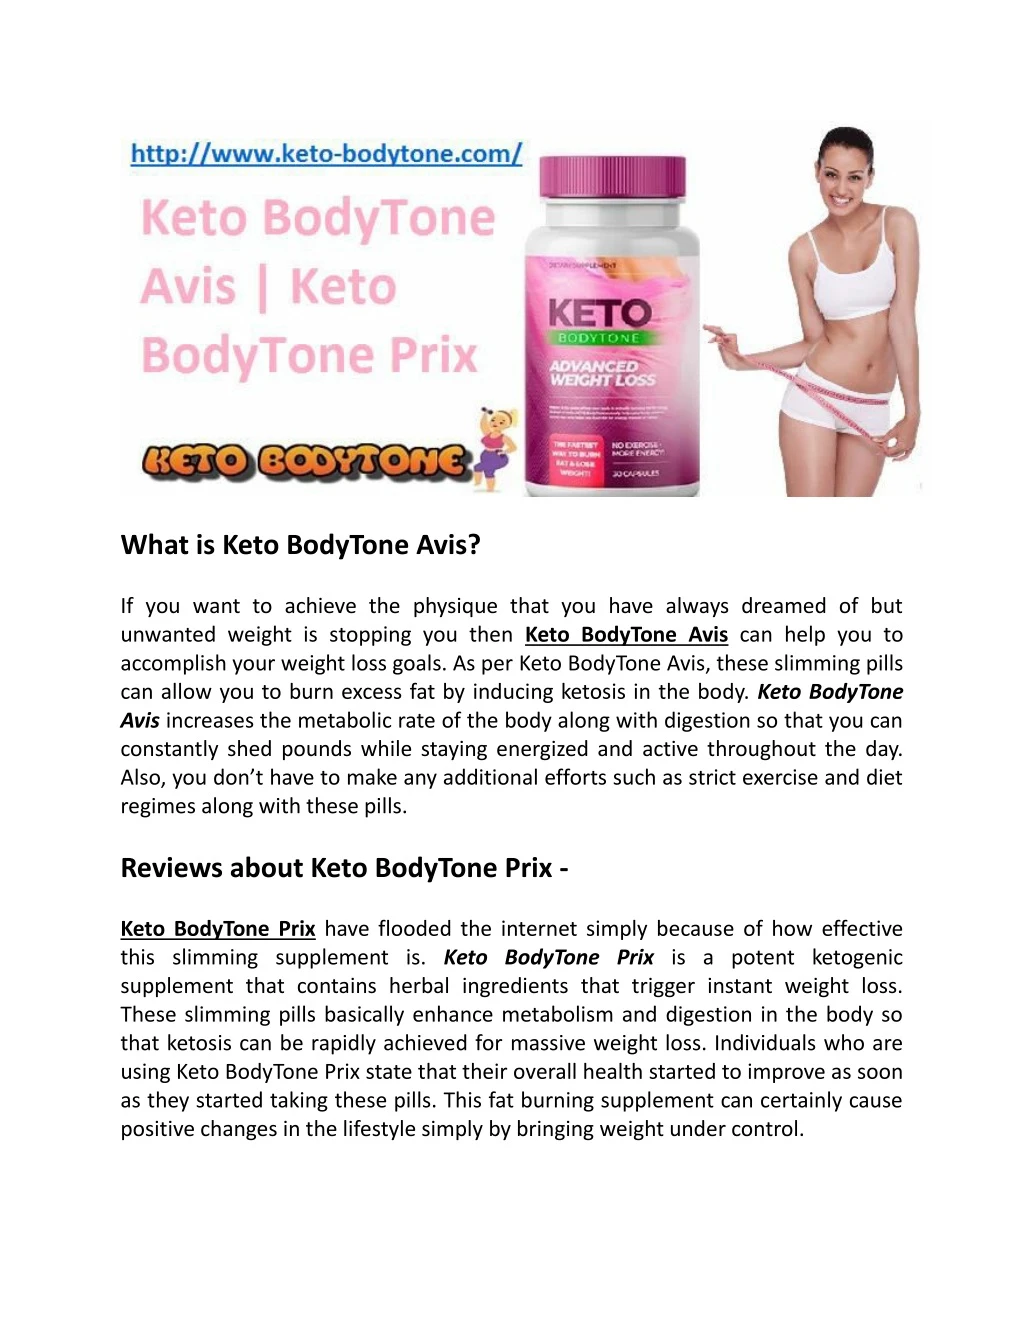 what is keto bodytone avis if you want to achieve